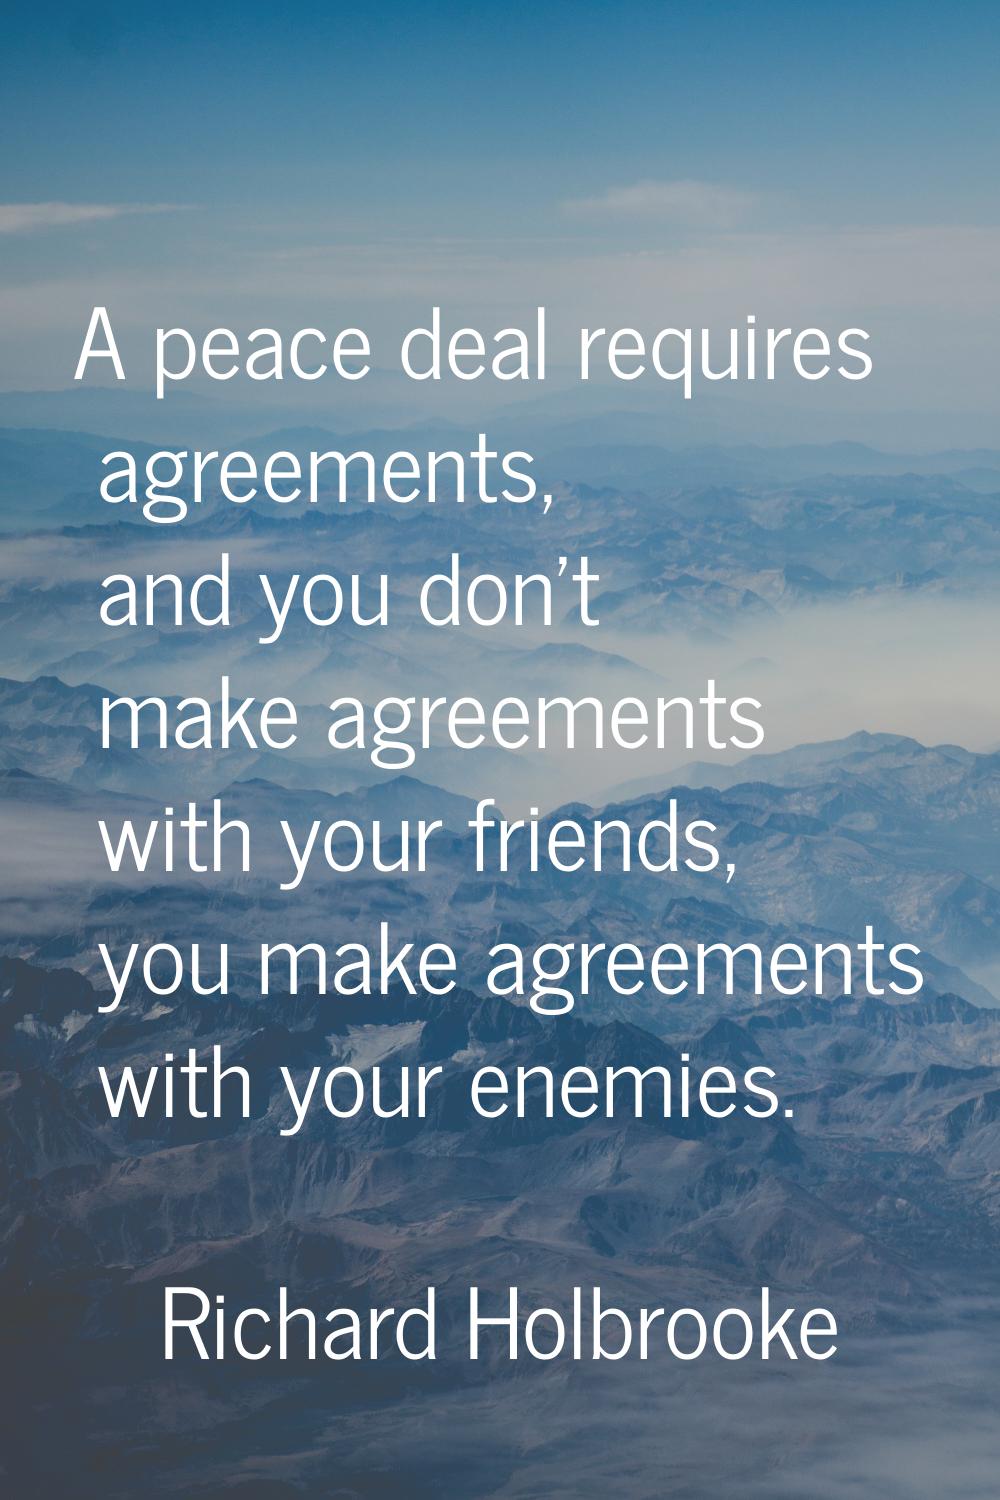 A peace deal requires agreements, and you don't make agreements with your friends, you make agreeme